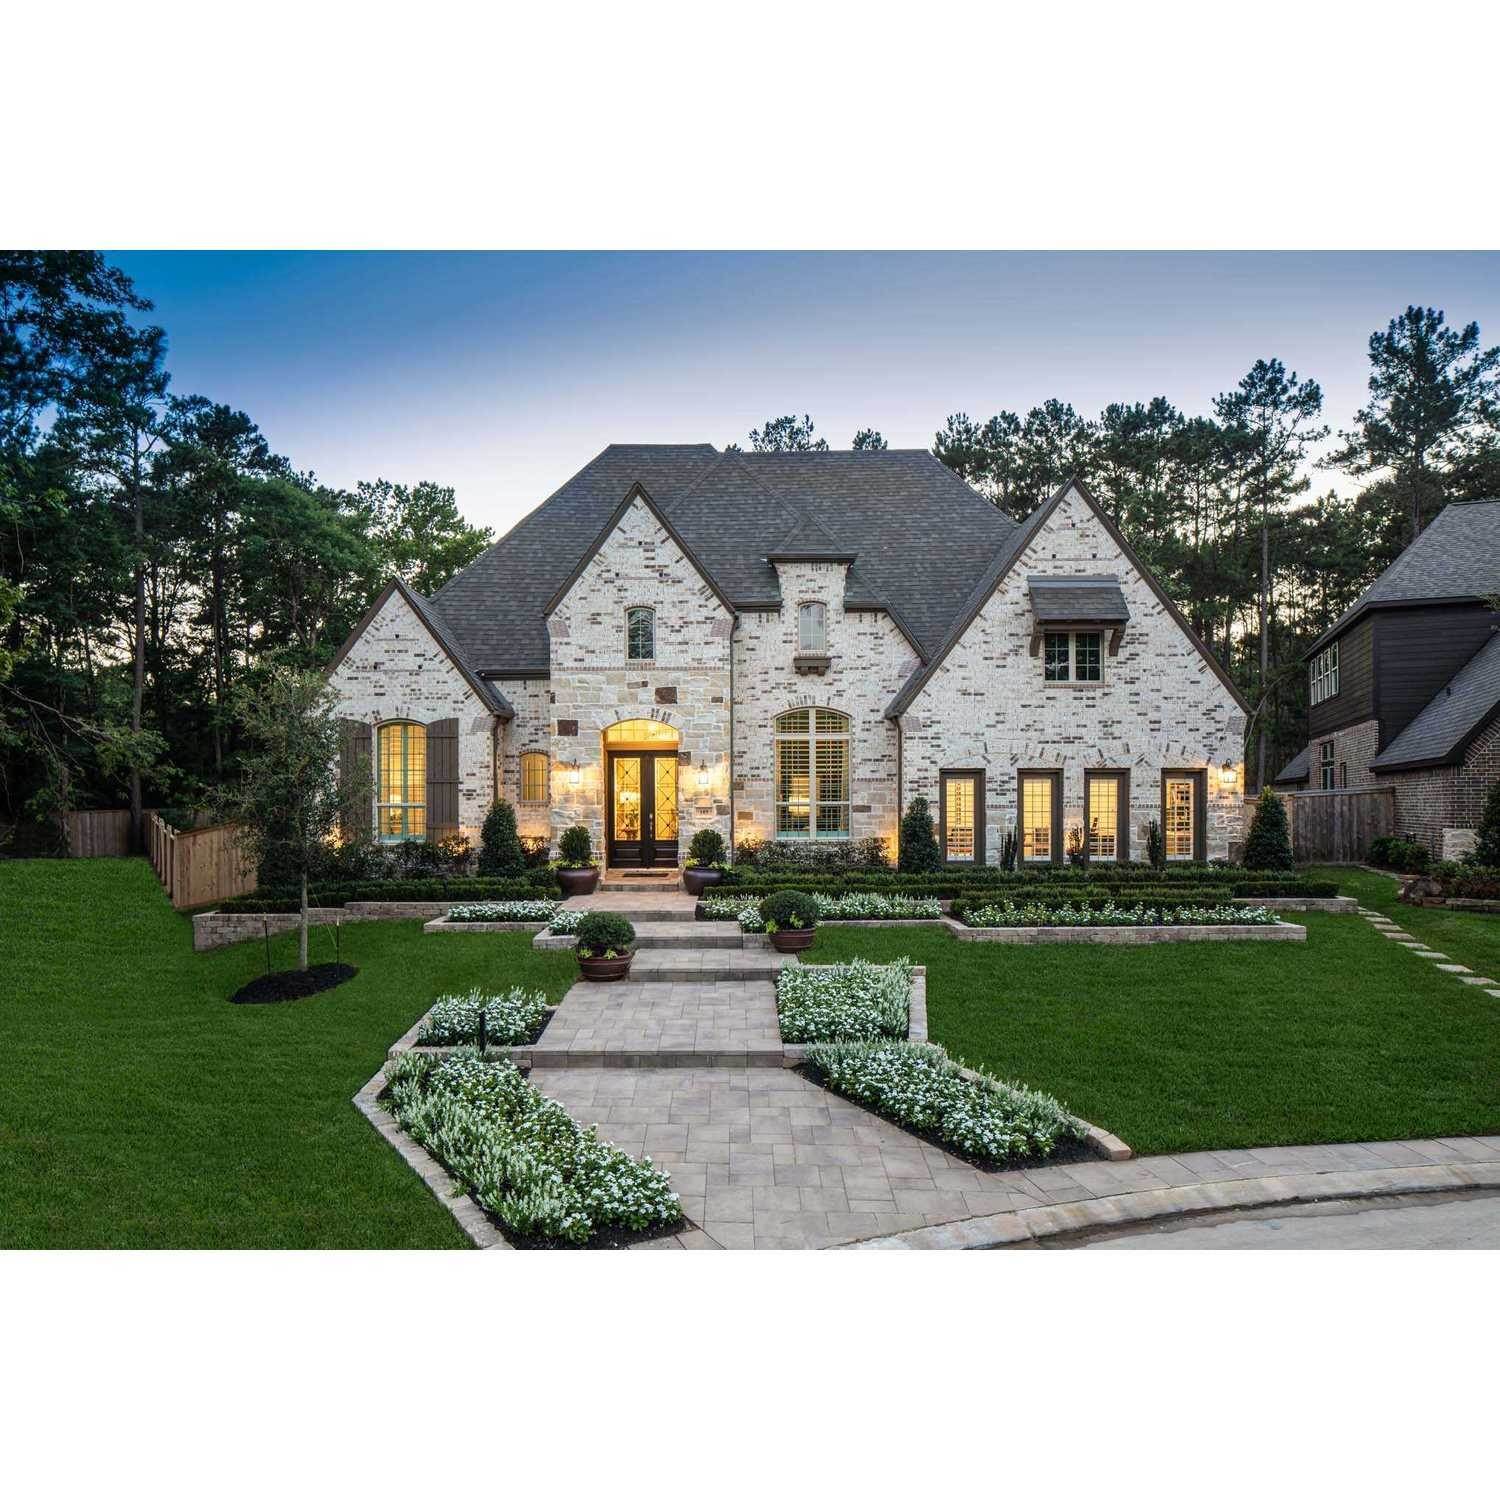 The Woodlands Hills 75ft. lots xây dựng tại 105 Teralyn Grove Loop, Willis, TX 77318